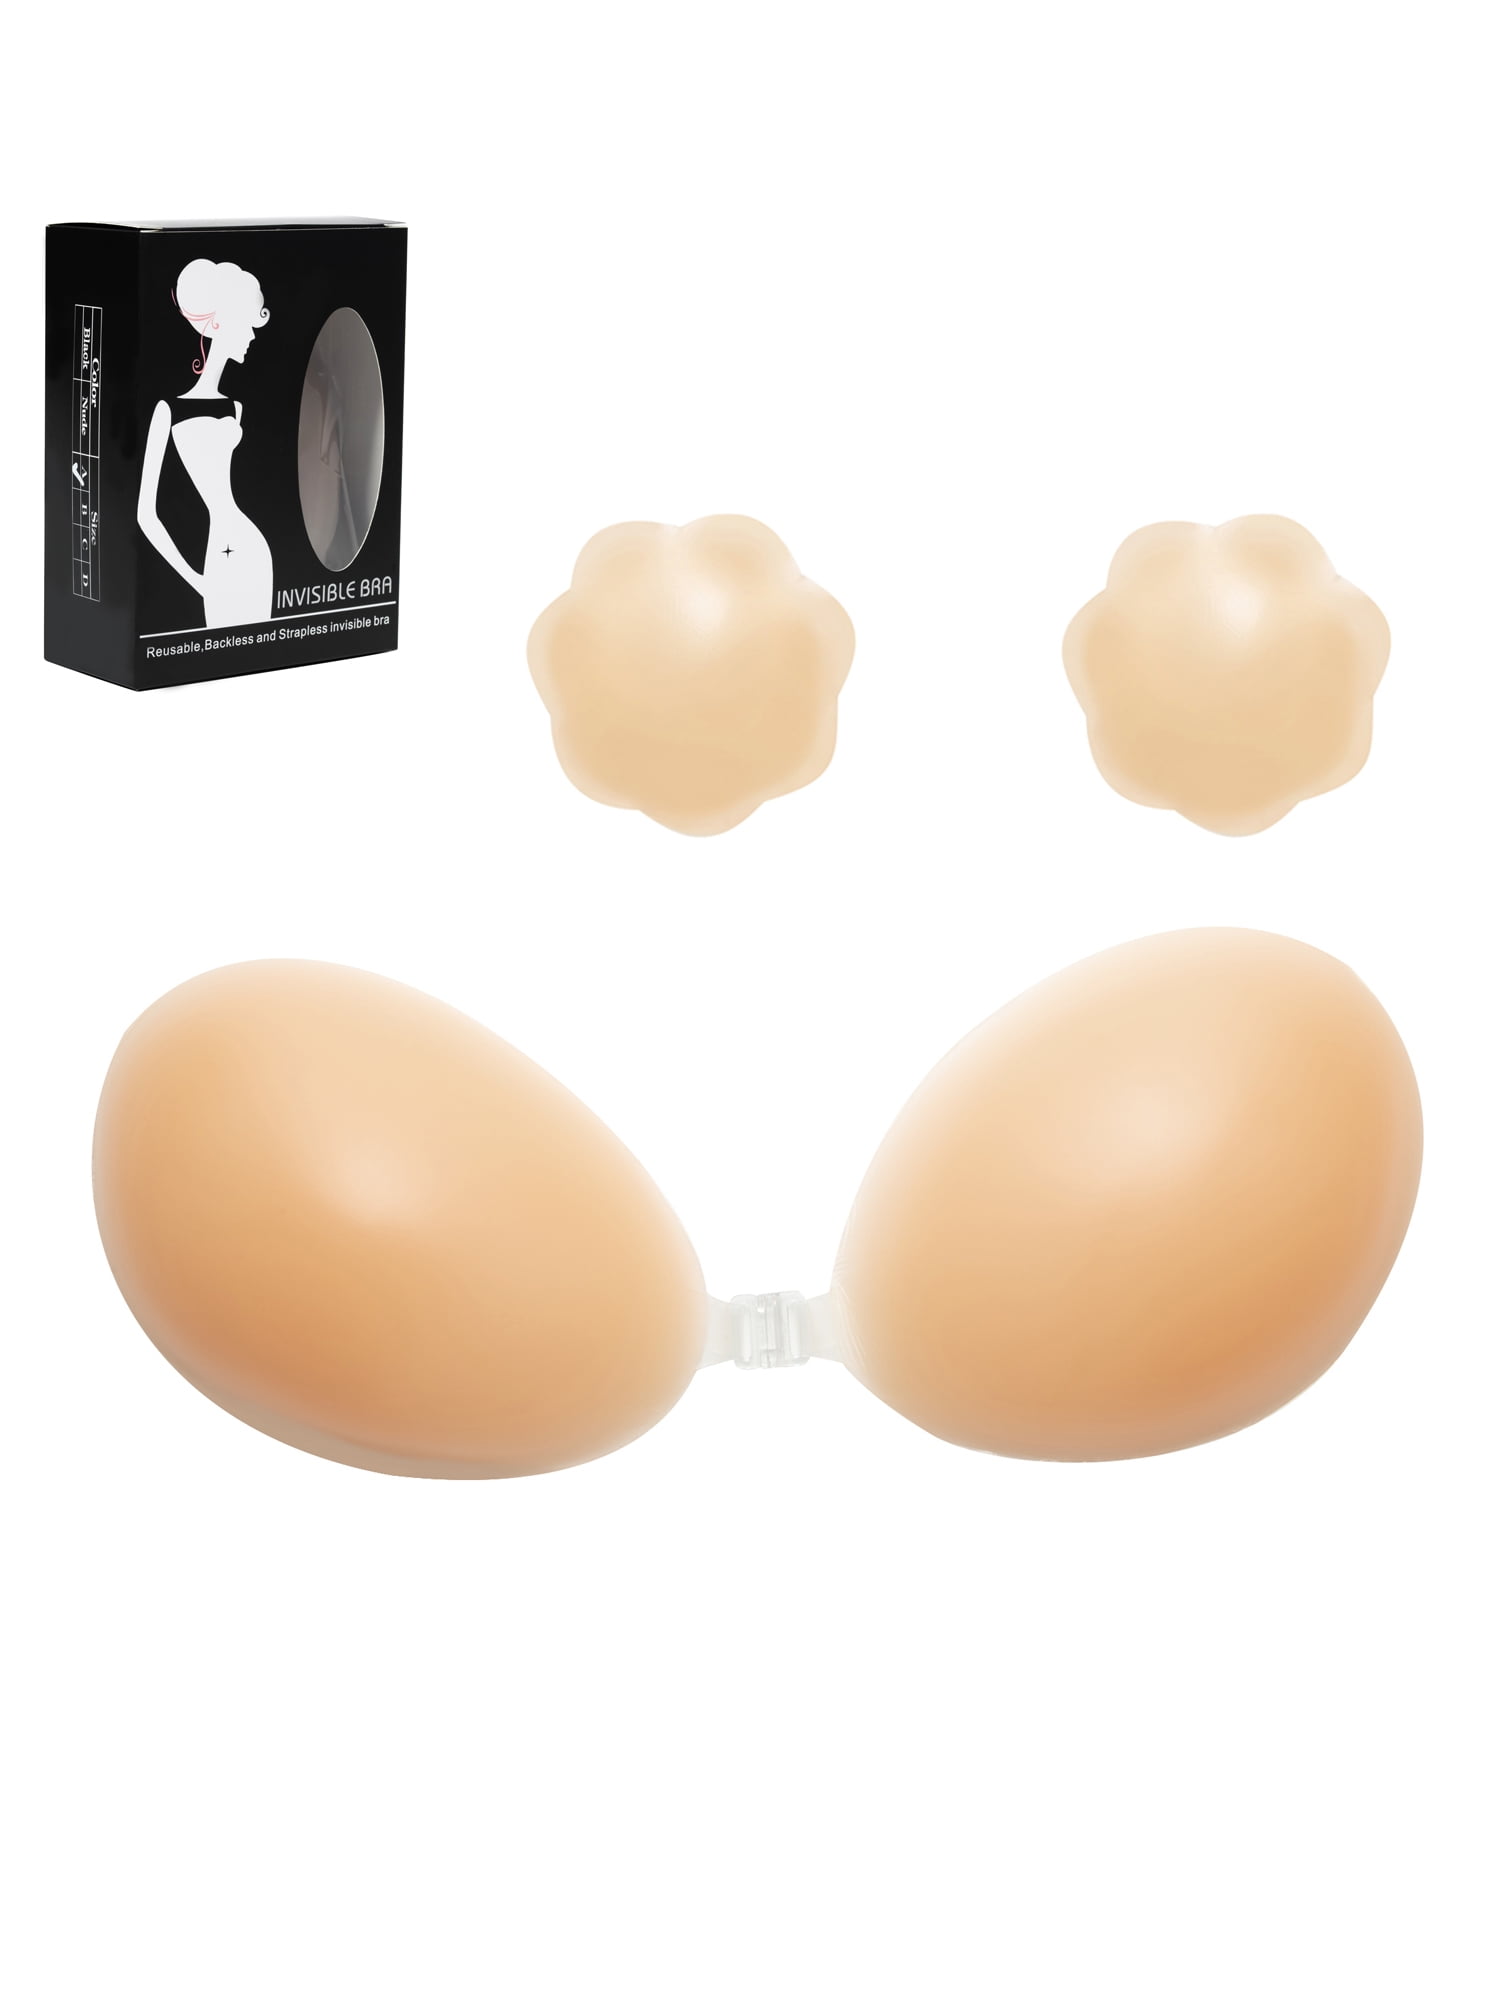 Fullness Women Silicone Breast Enhancer with Nipples Women Bra Inserts Push  up Pad Size XL 